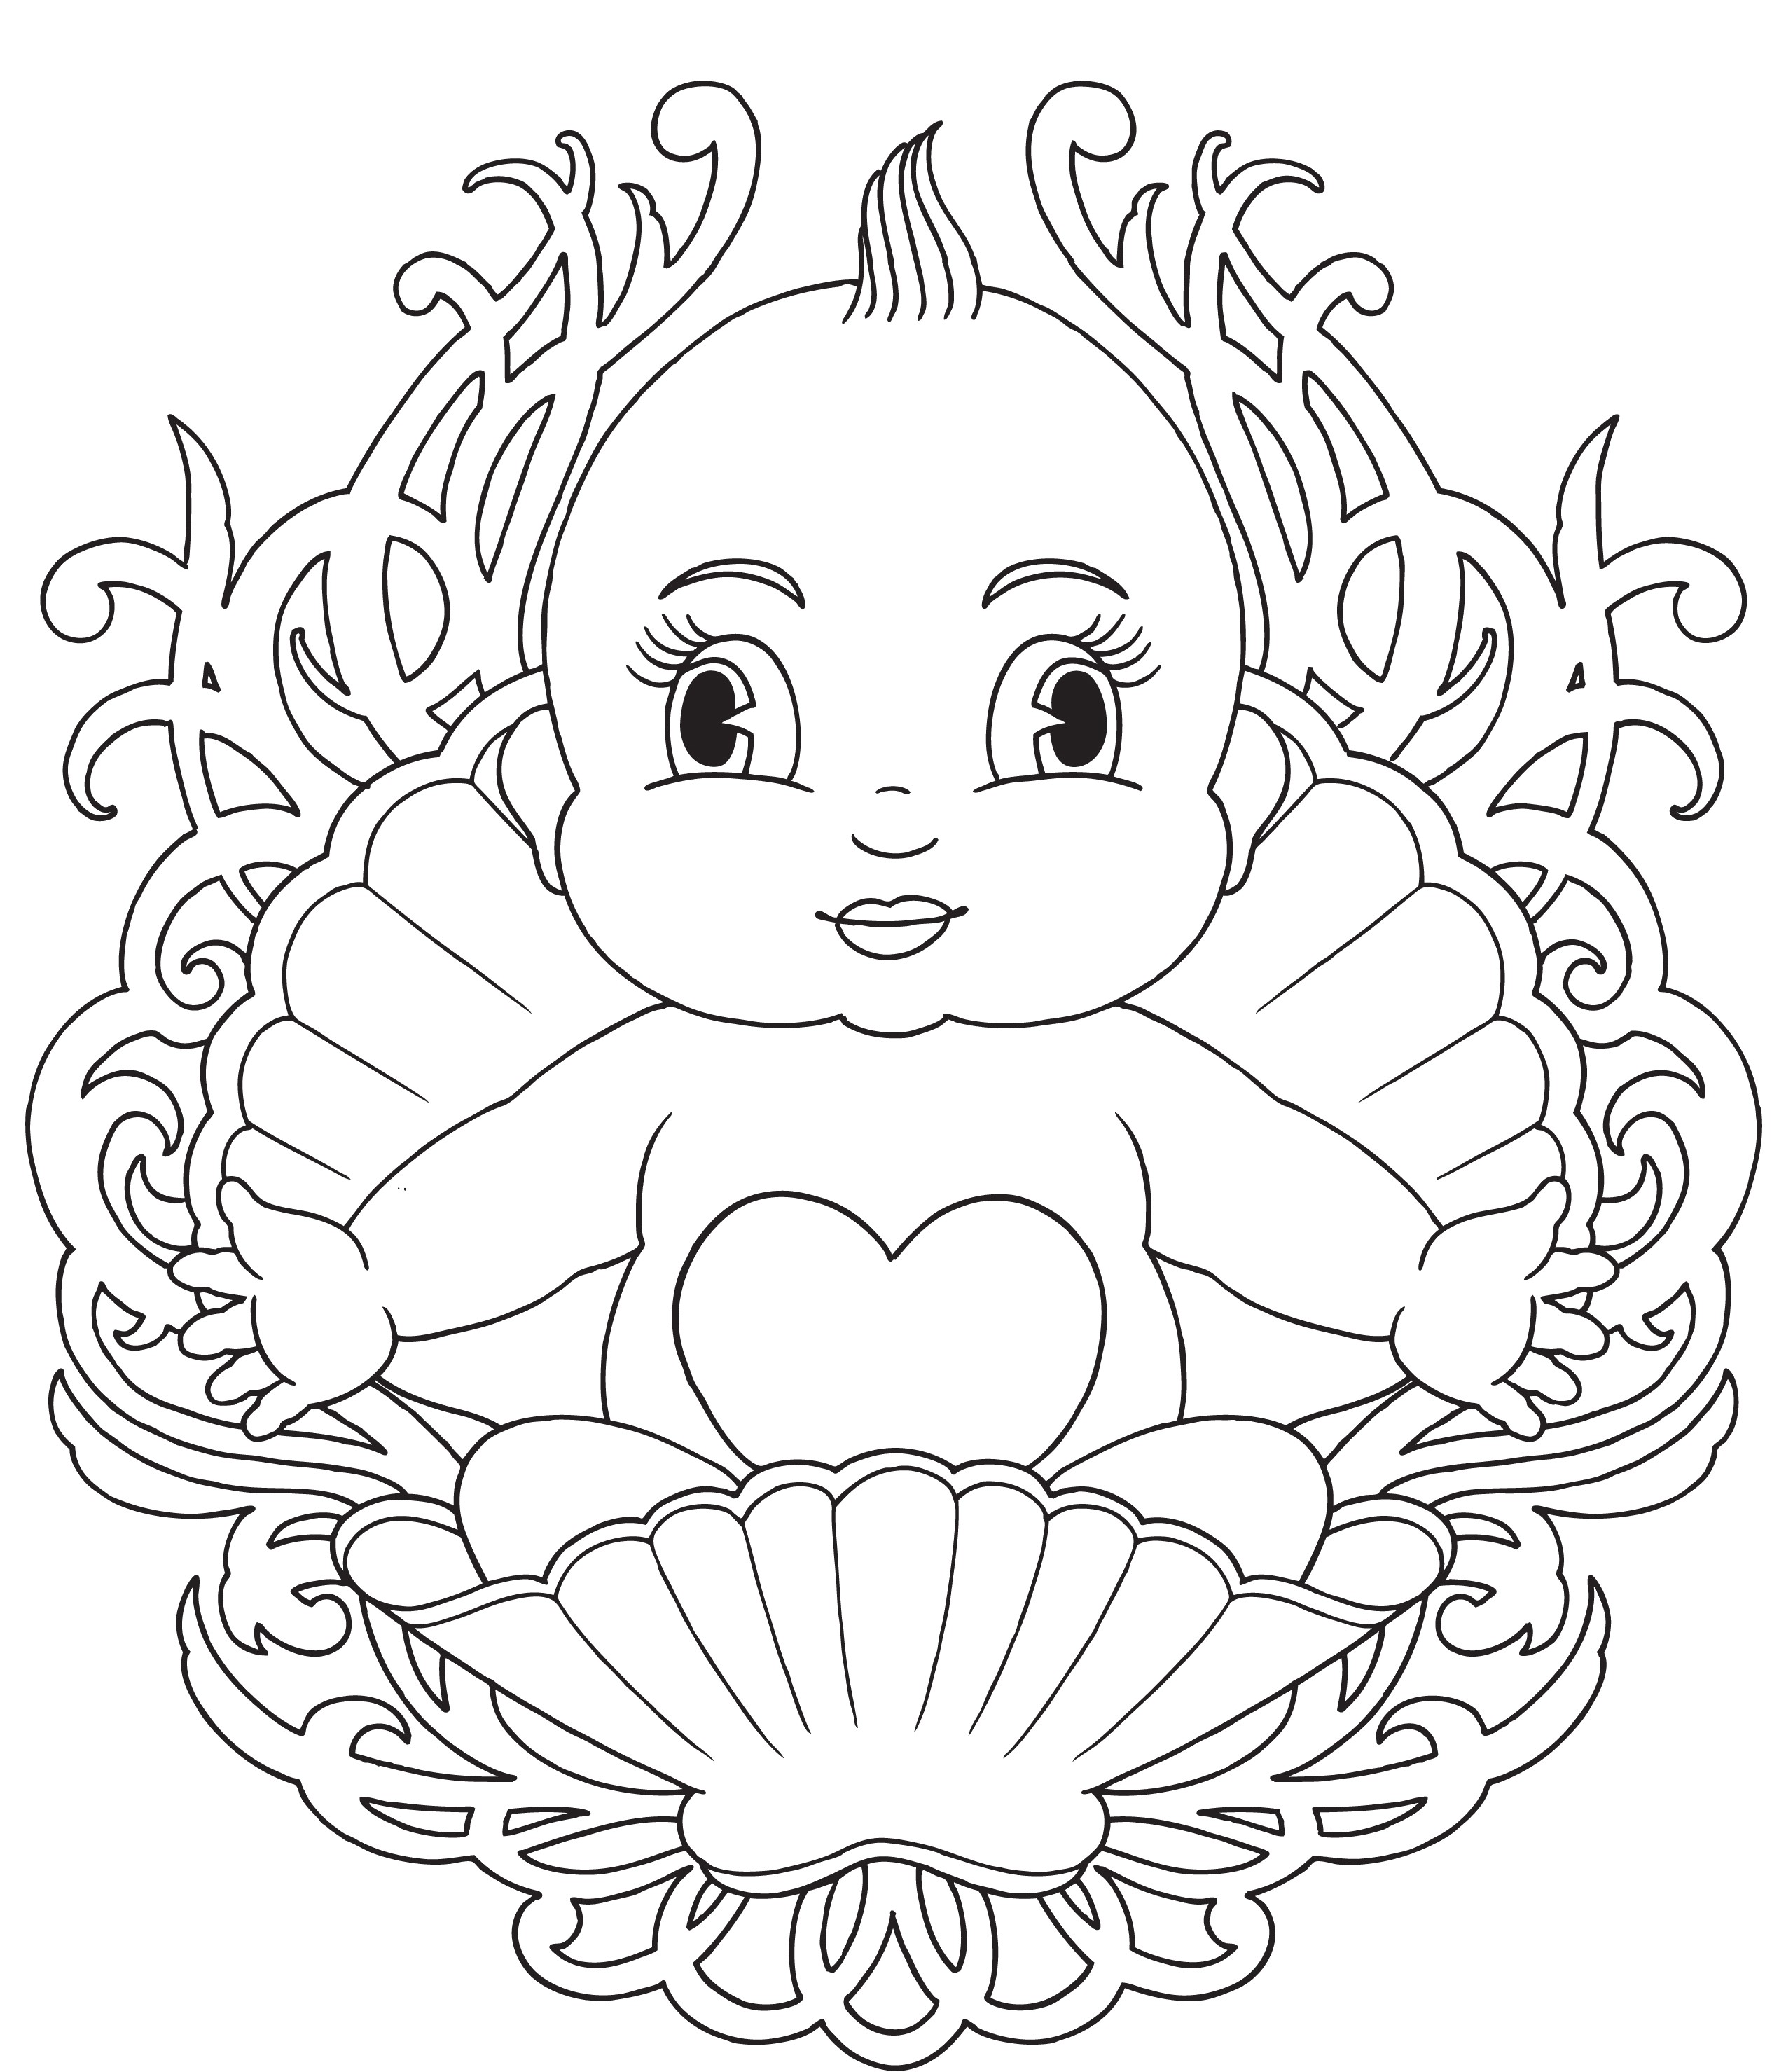 Baby Elsa Coloring Pages at GetColorings.com | Free ...